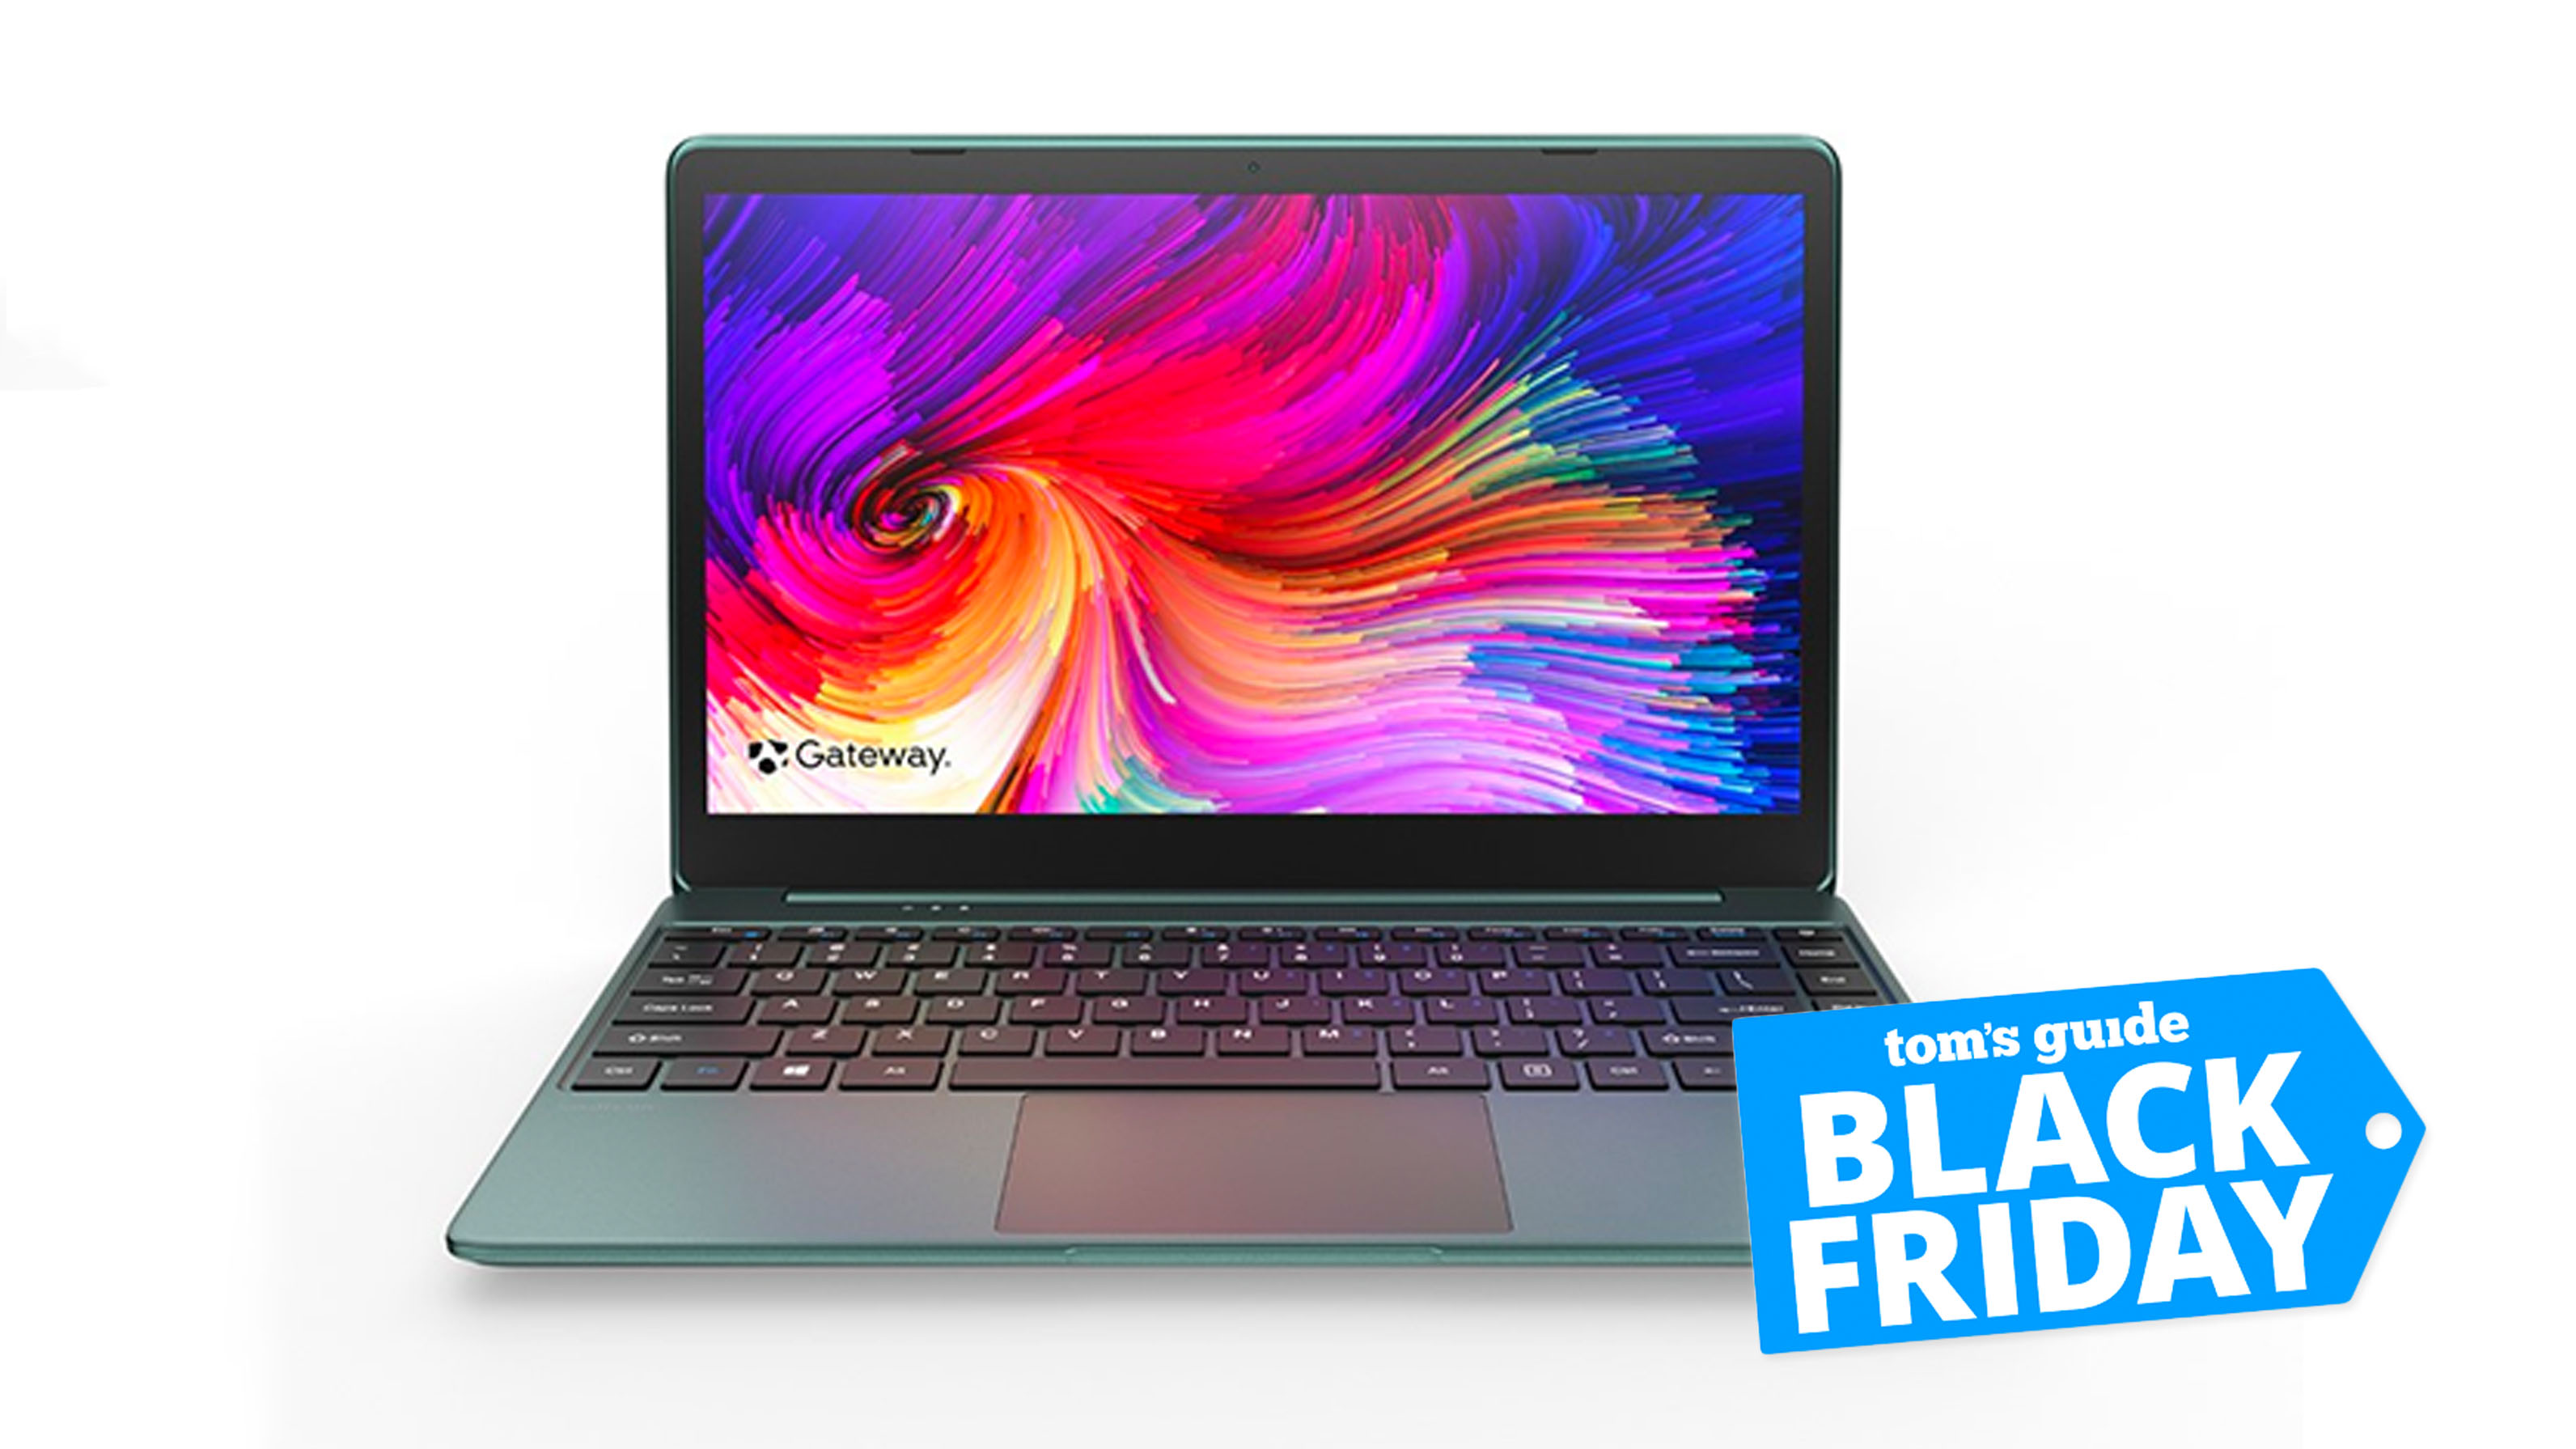 Hurry! Walmart's best Black Friday laptop deal is right here Tom's Guide